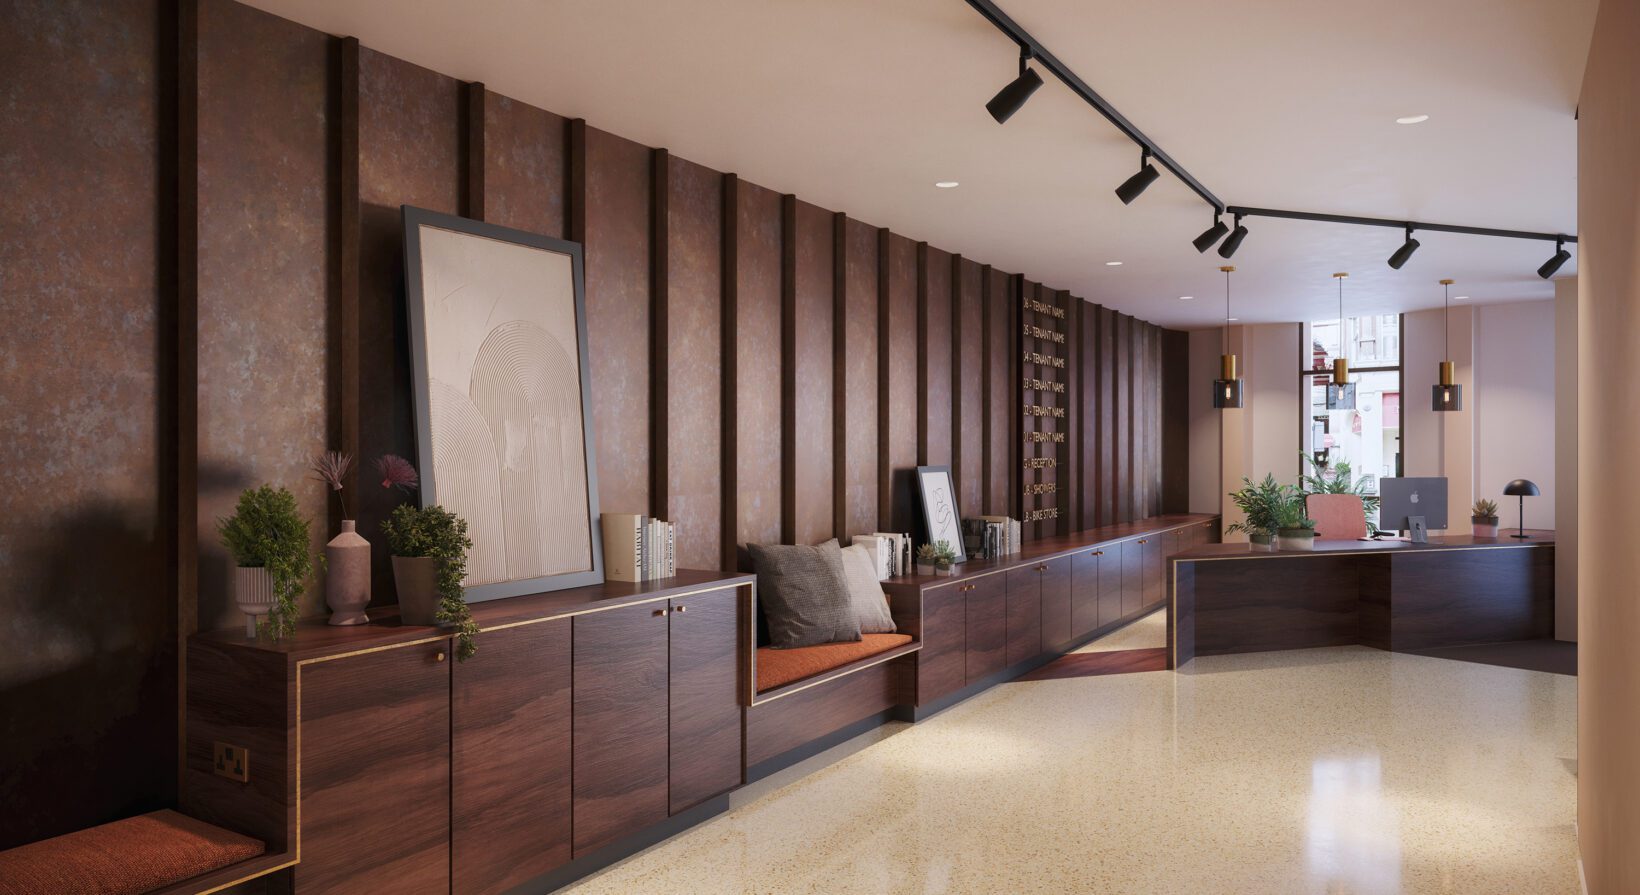 CGI depicts newly refurbished building reception